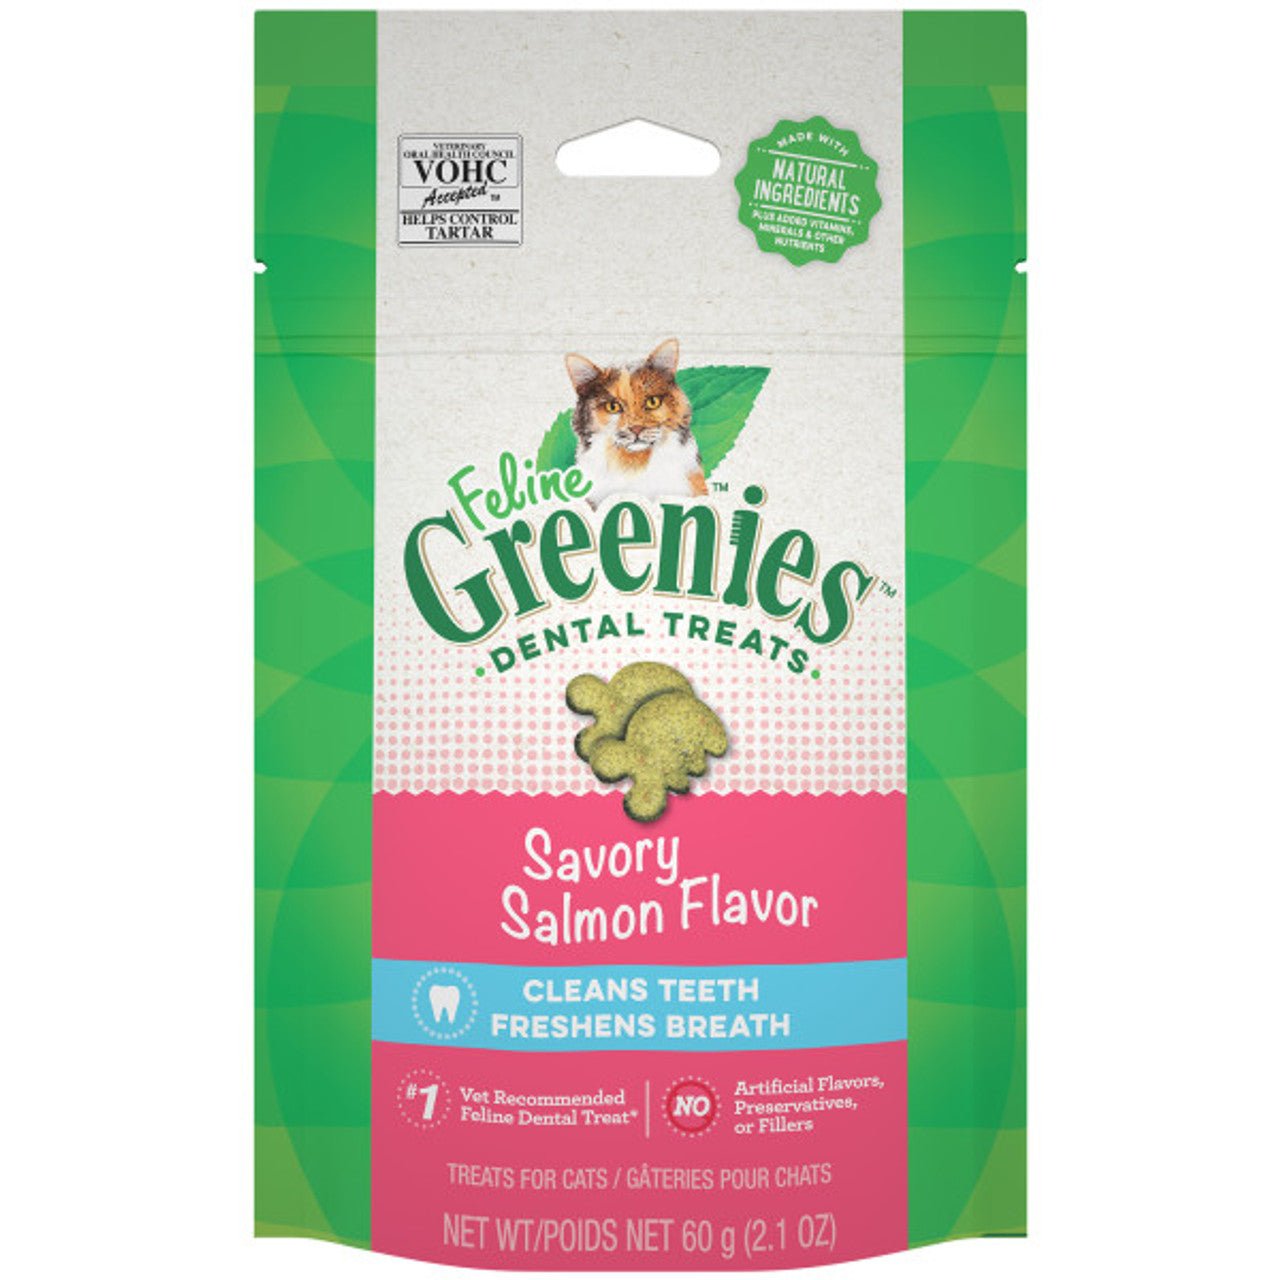 Greenies Treats for Cats - Tuck In Healthy Pet Food & Animal Natural Health Supplies